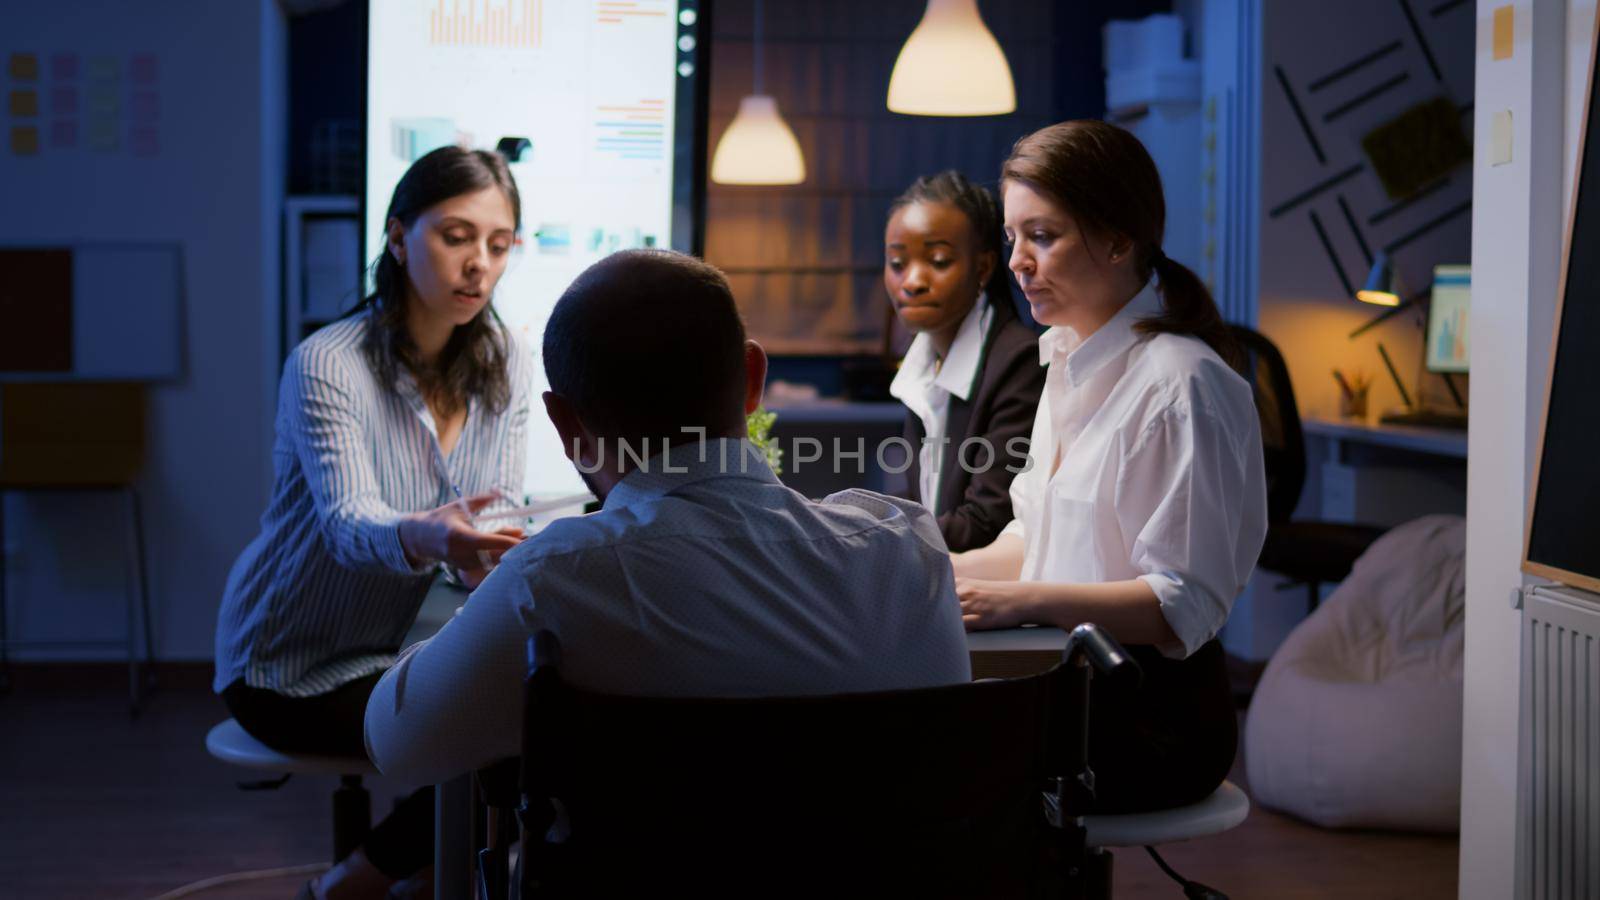 Workaholic disabled businessman in wheelchair sharing statistics paperwork overworking in office meeting room late at night. Diverse of multi-ethnic teamwork analyzing financial strategy